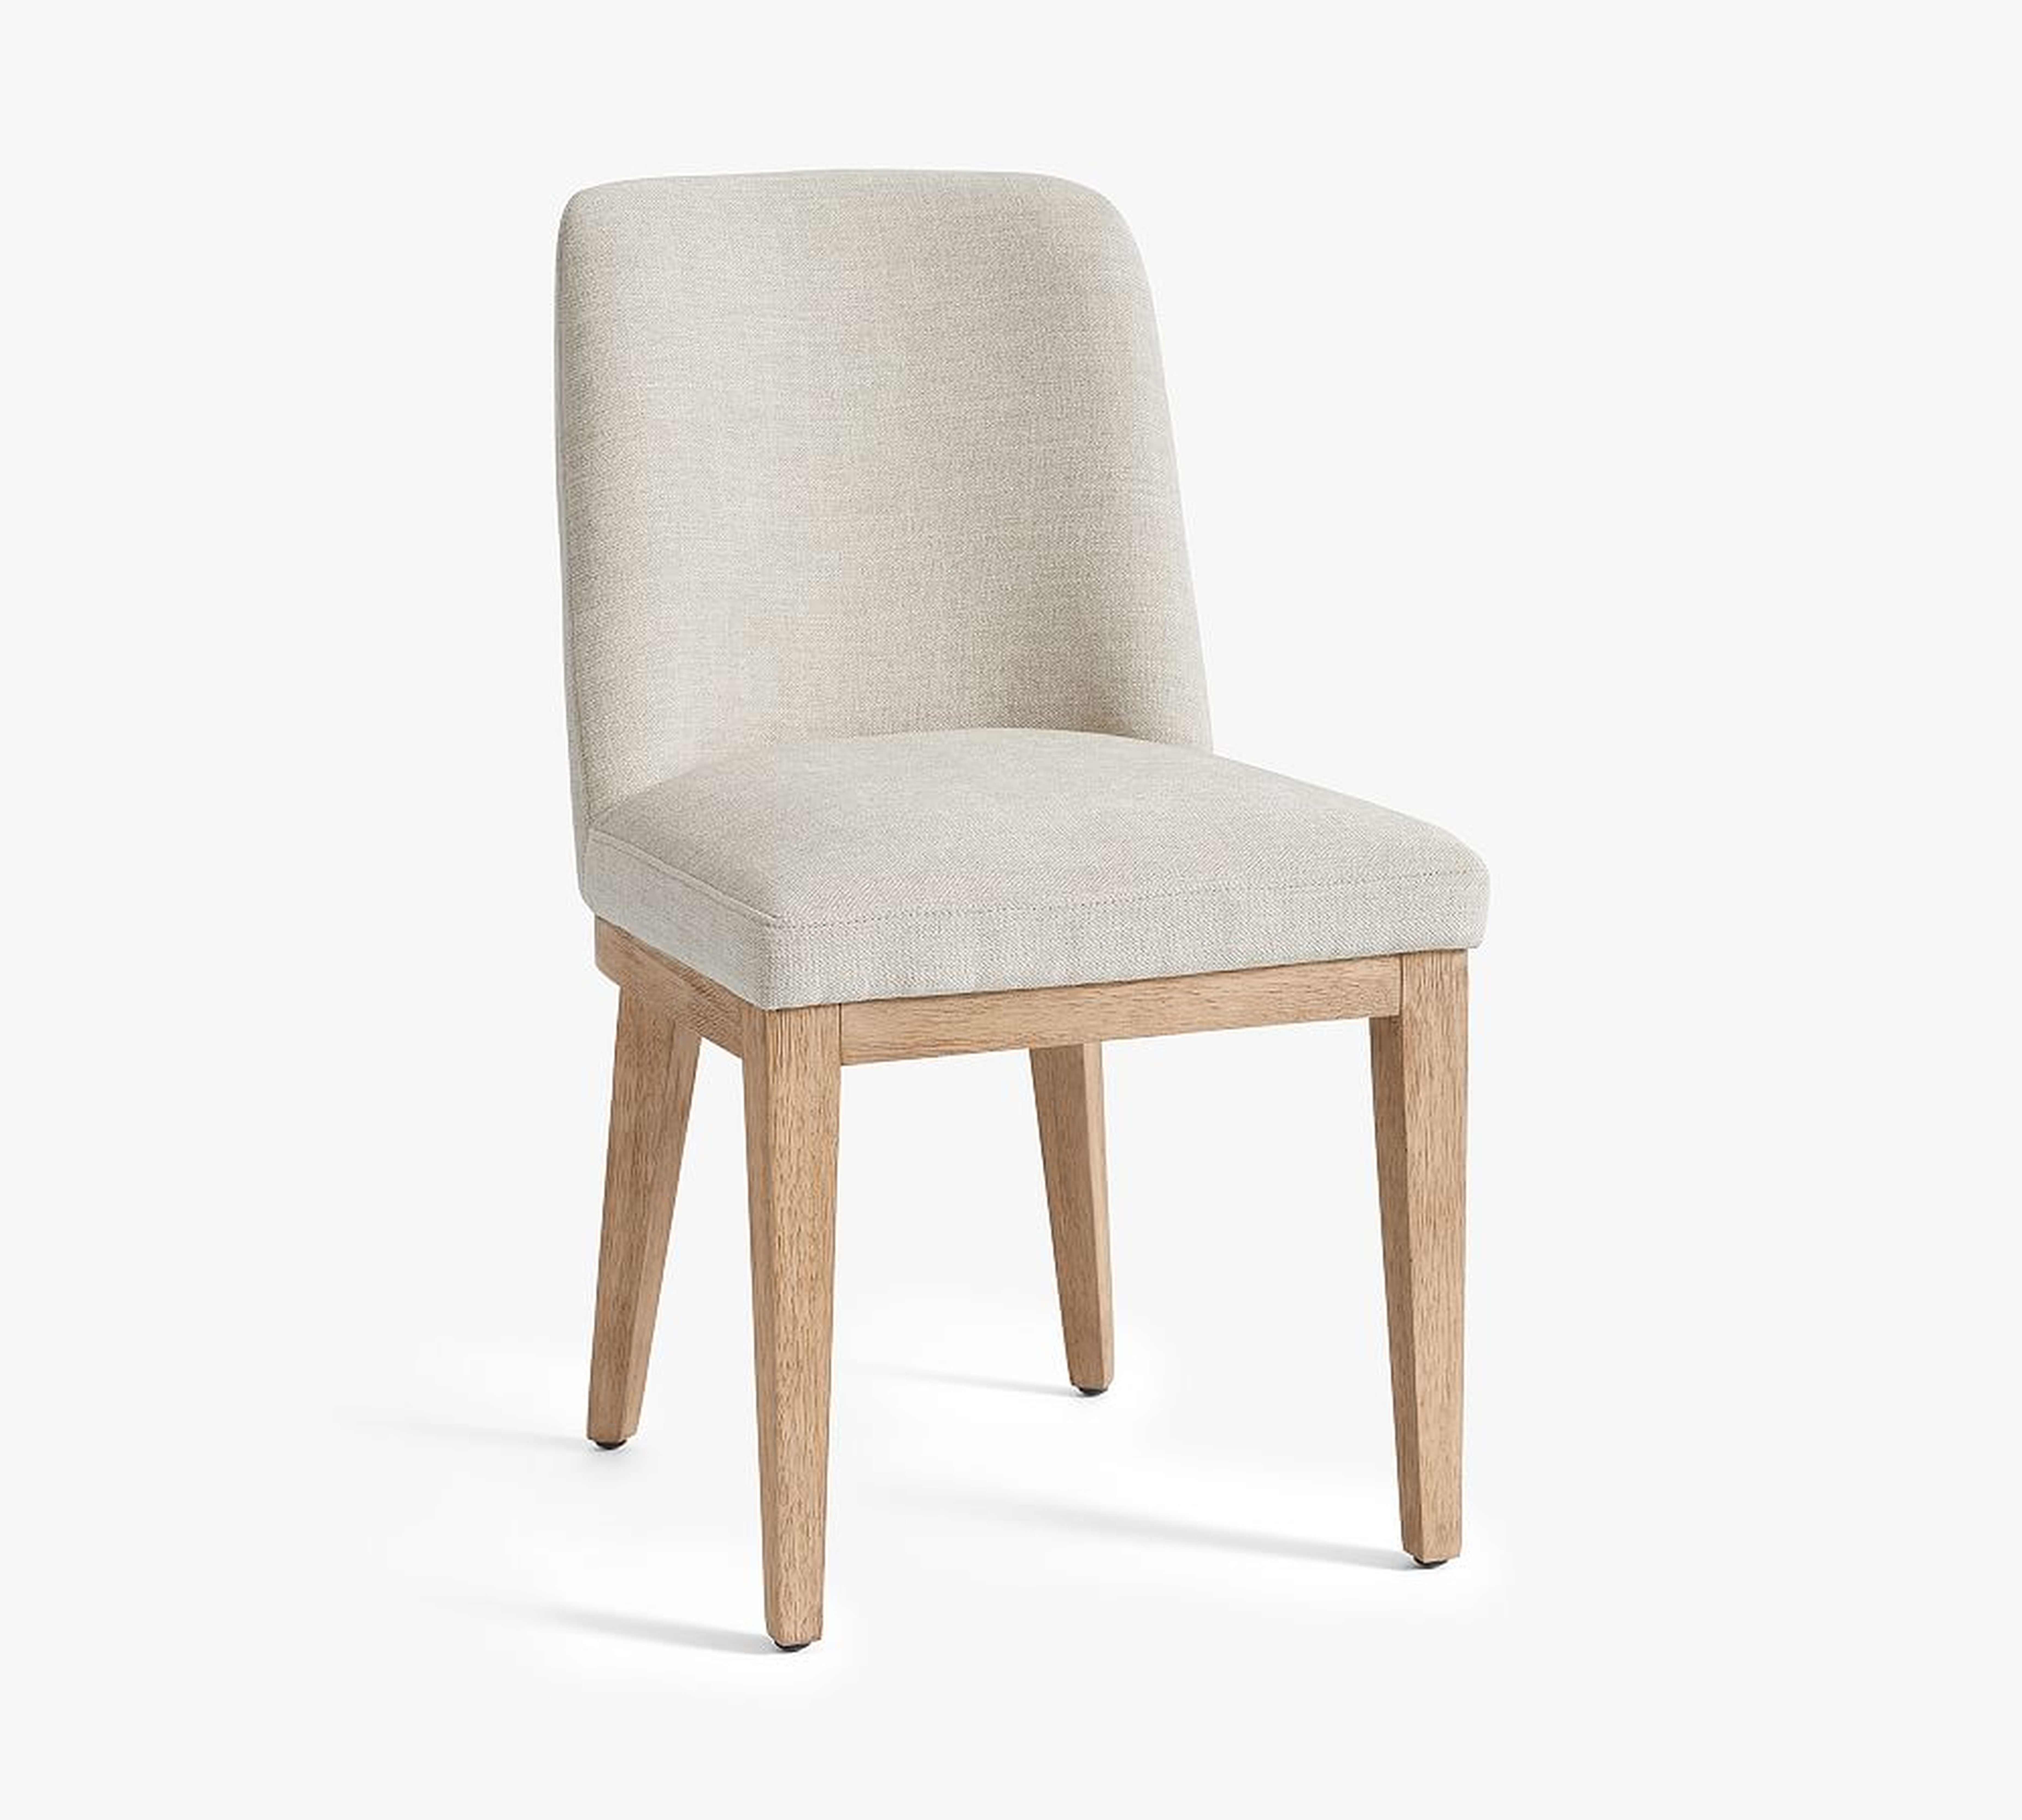 Layton Upholstered Side Dining Chair, Seadrift Legs, Performance Boucle Oatmeal - Pottery Barn